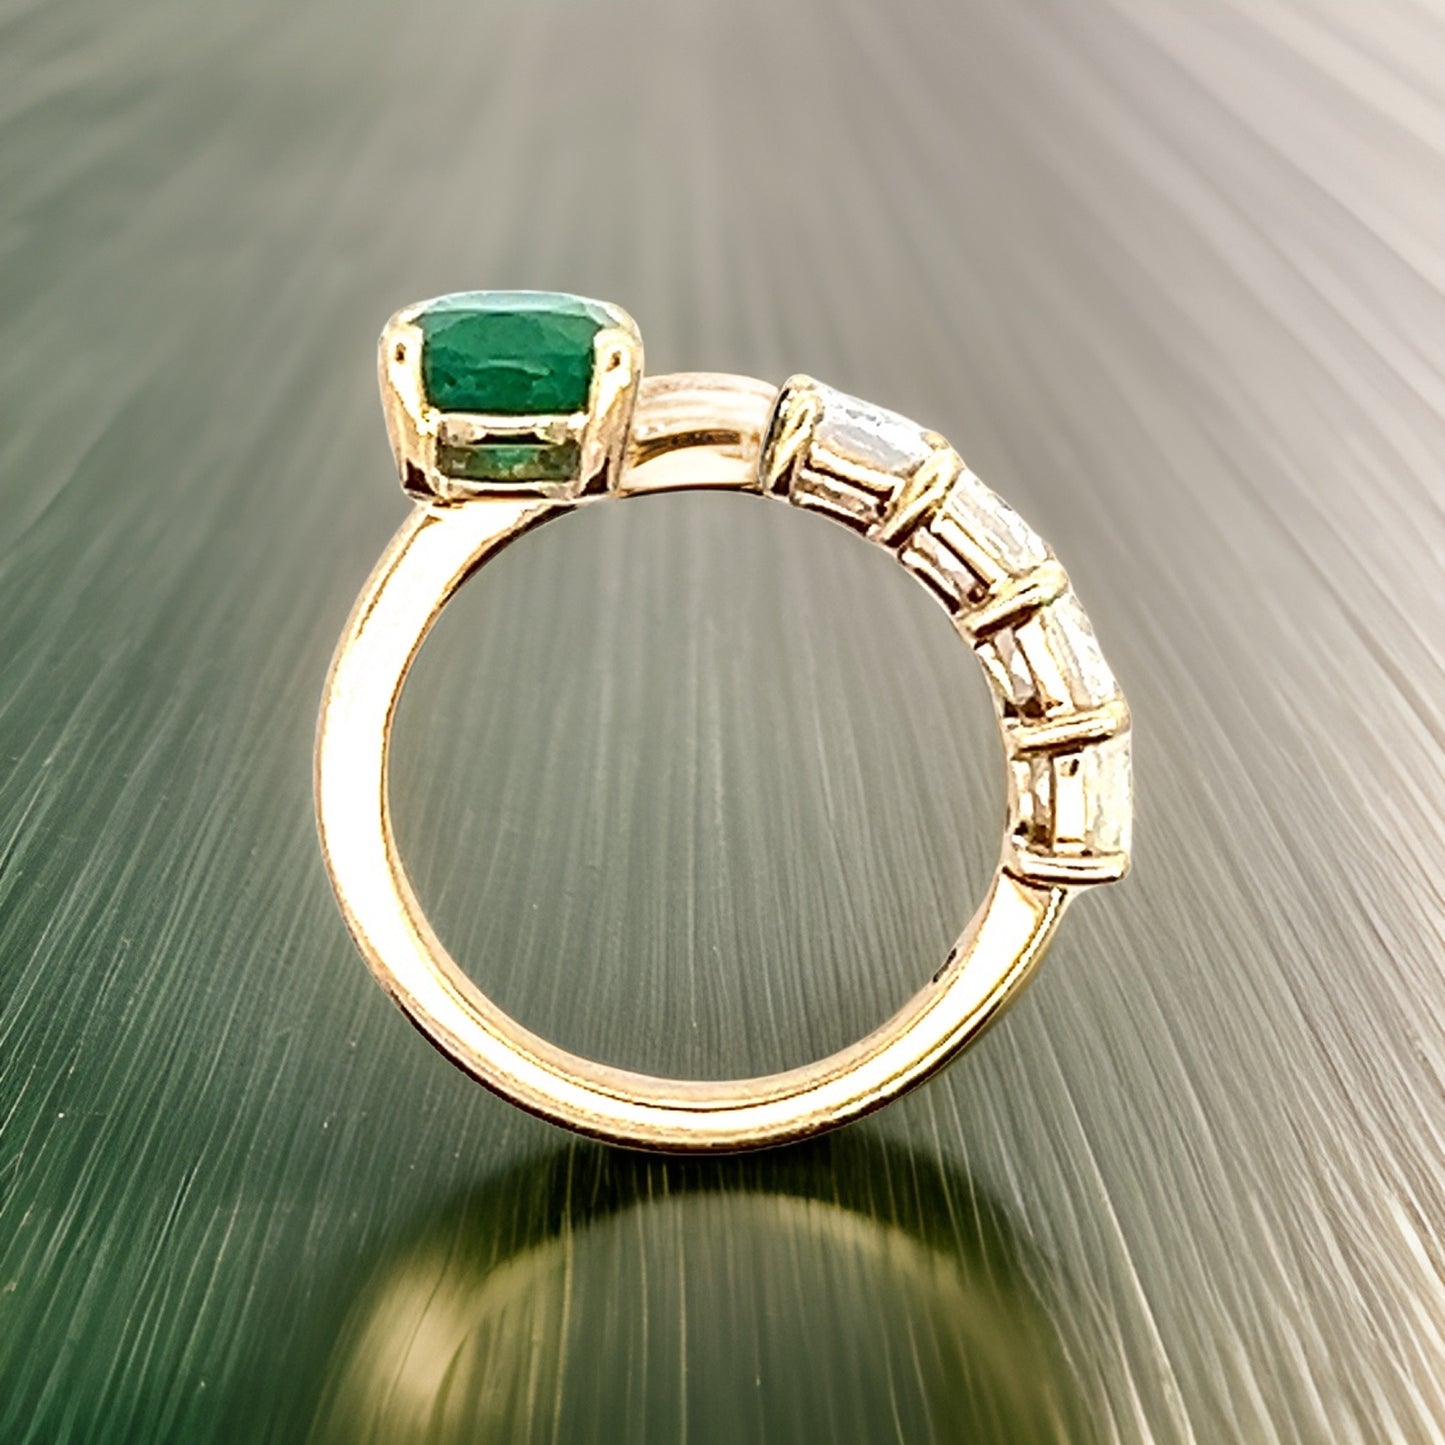 Natural Emerald and White Sapphire Ring 6.5 14k Y Gold 4.05 TCW Certified $4,950 310640